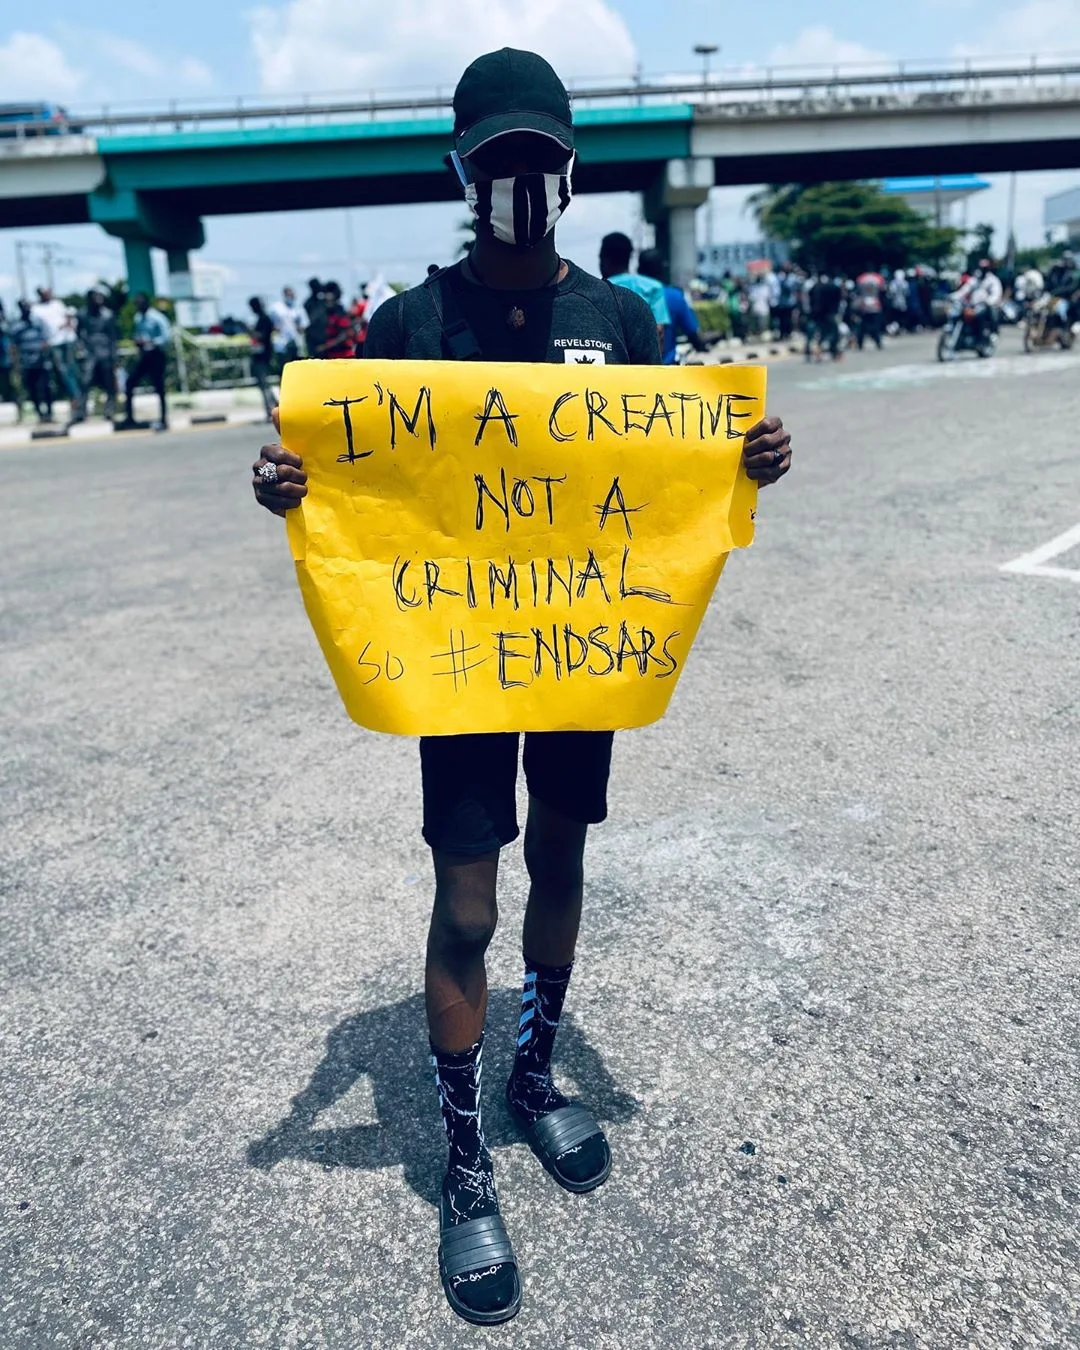 END SARS IN LAGOS